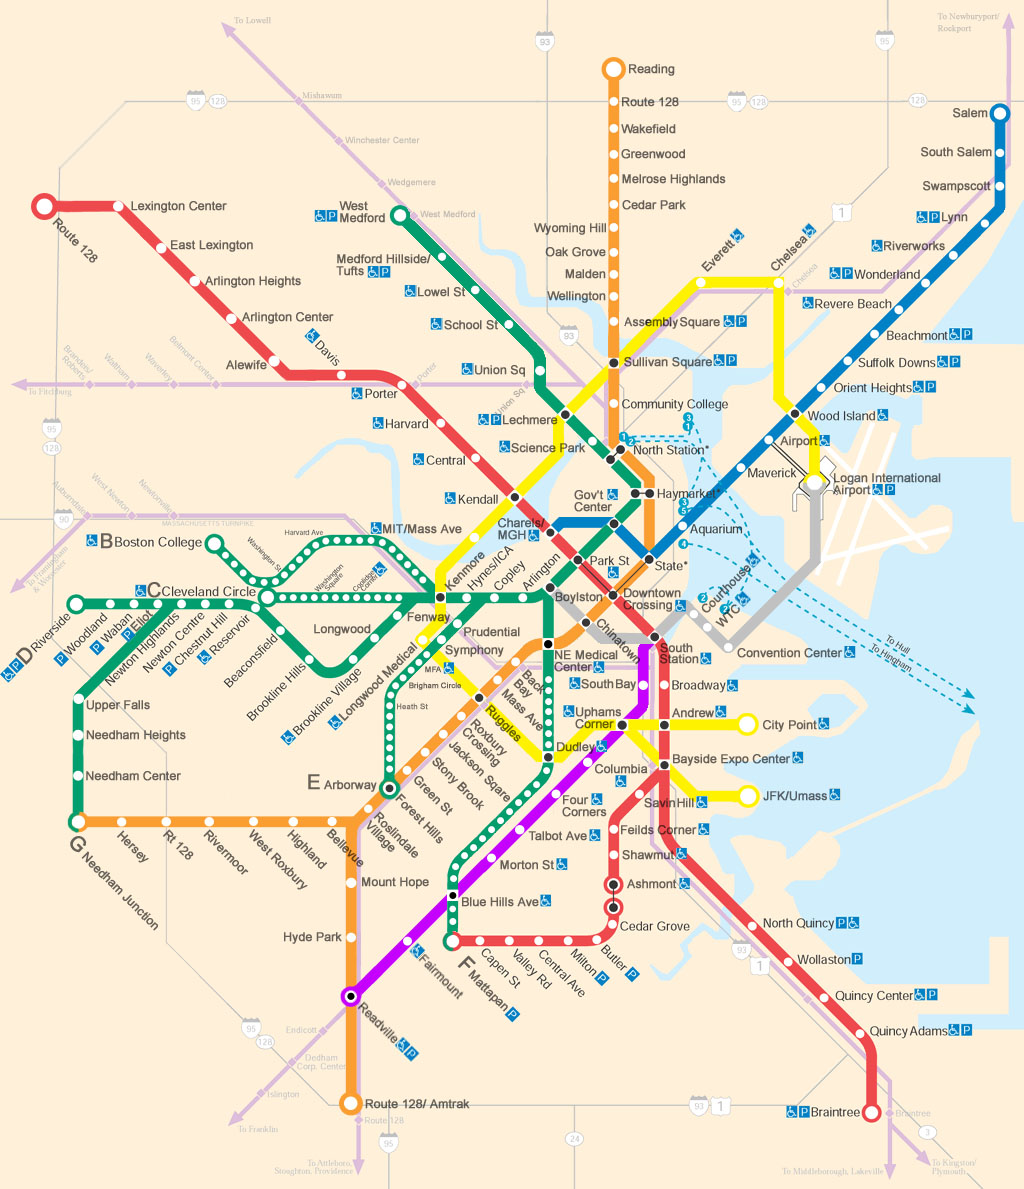 A speculative MBTA map by Andrew Lynch.